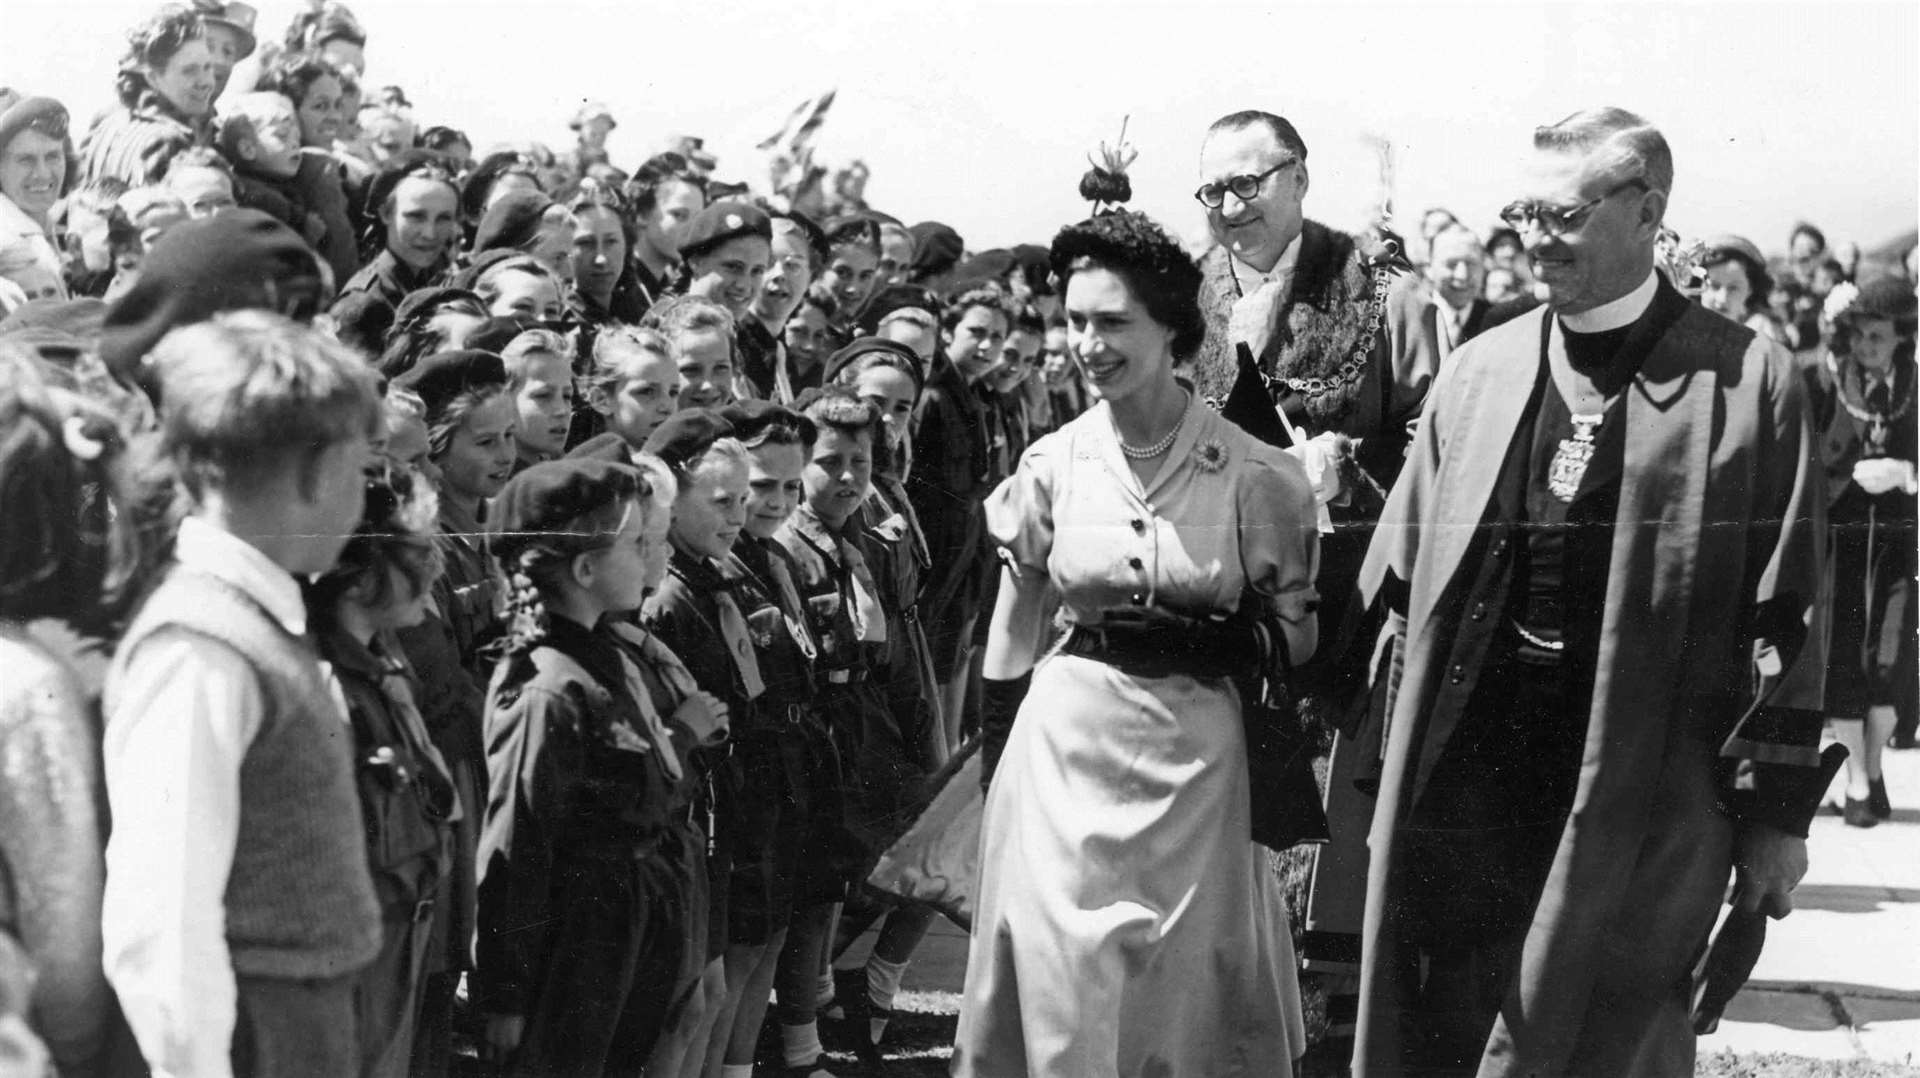 Princess Margaret on her first official visit to Ramsgate, in May 1950. She visited the Newington housing estate and named its central thoroughfare, Princess Margaret Avenue. She then planted a commemorative tree. The Princess also cut the first sod on the site of the council's 1,000th post-war house